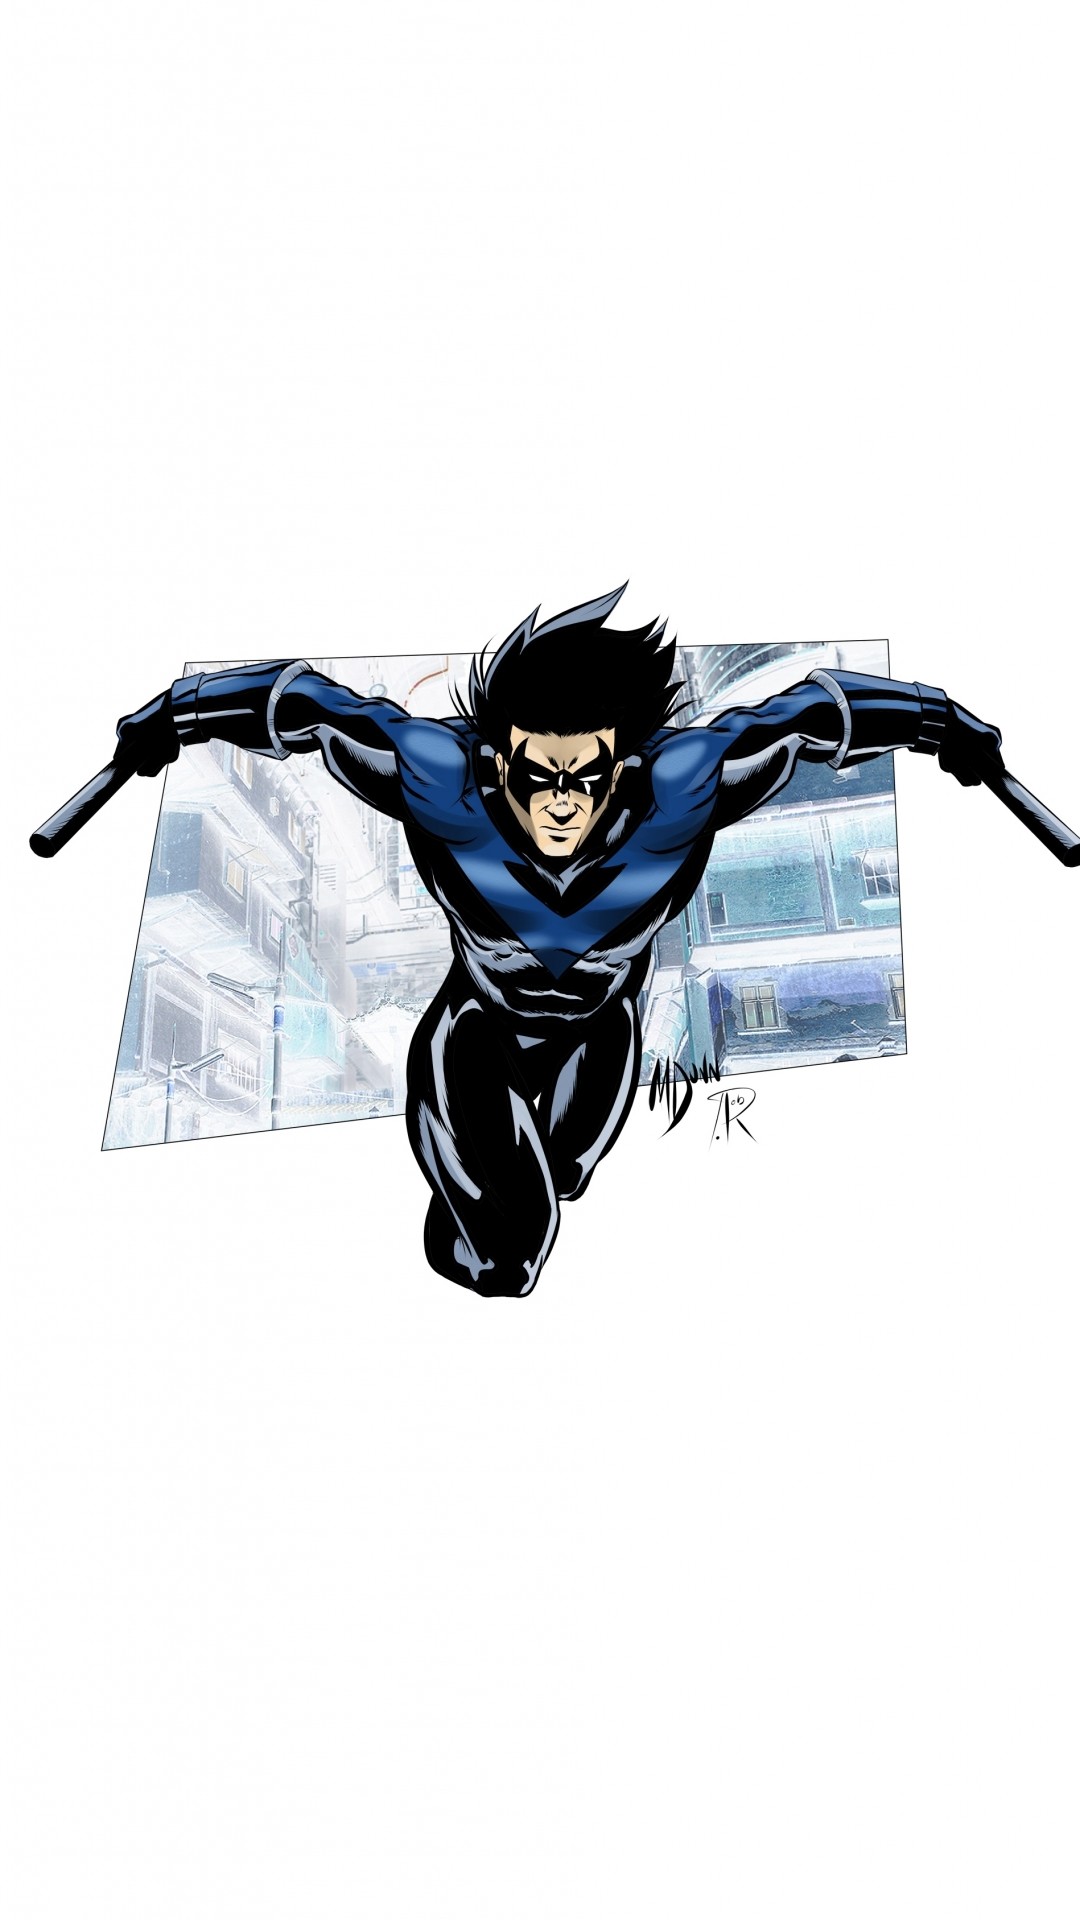 1080x1920 Image for Nightwing IPhone | Resolution:  px - Image ID:100517036